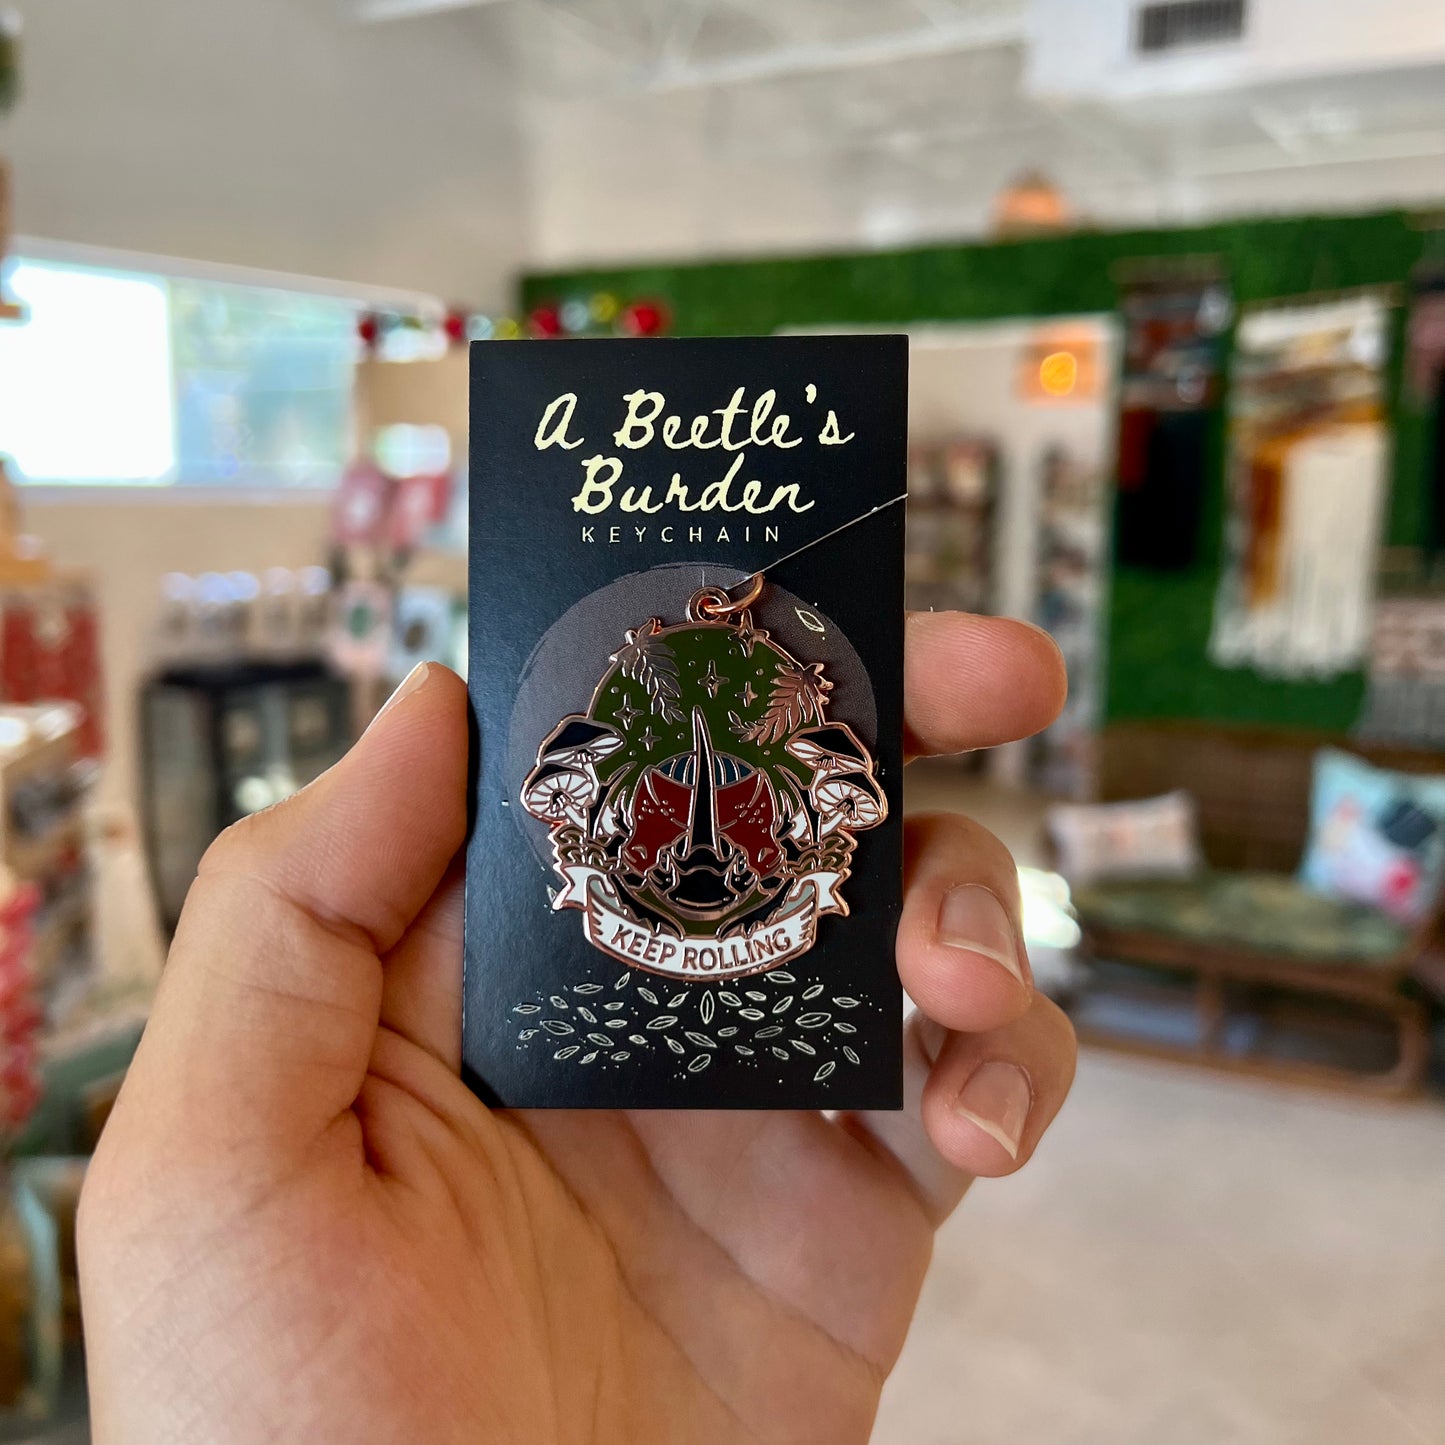 A Beetle’s Burden “Keep Rolling” Keychains